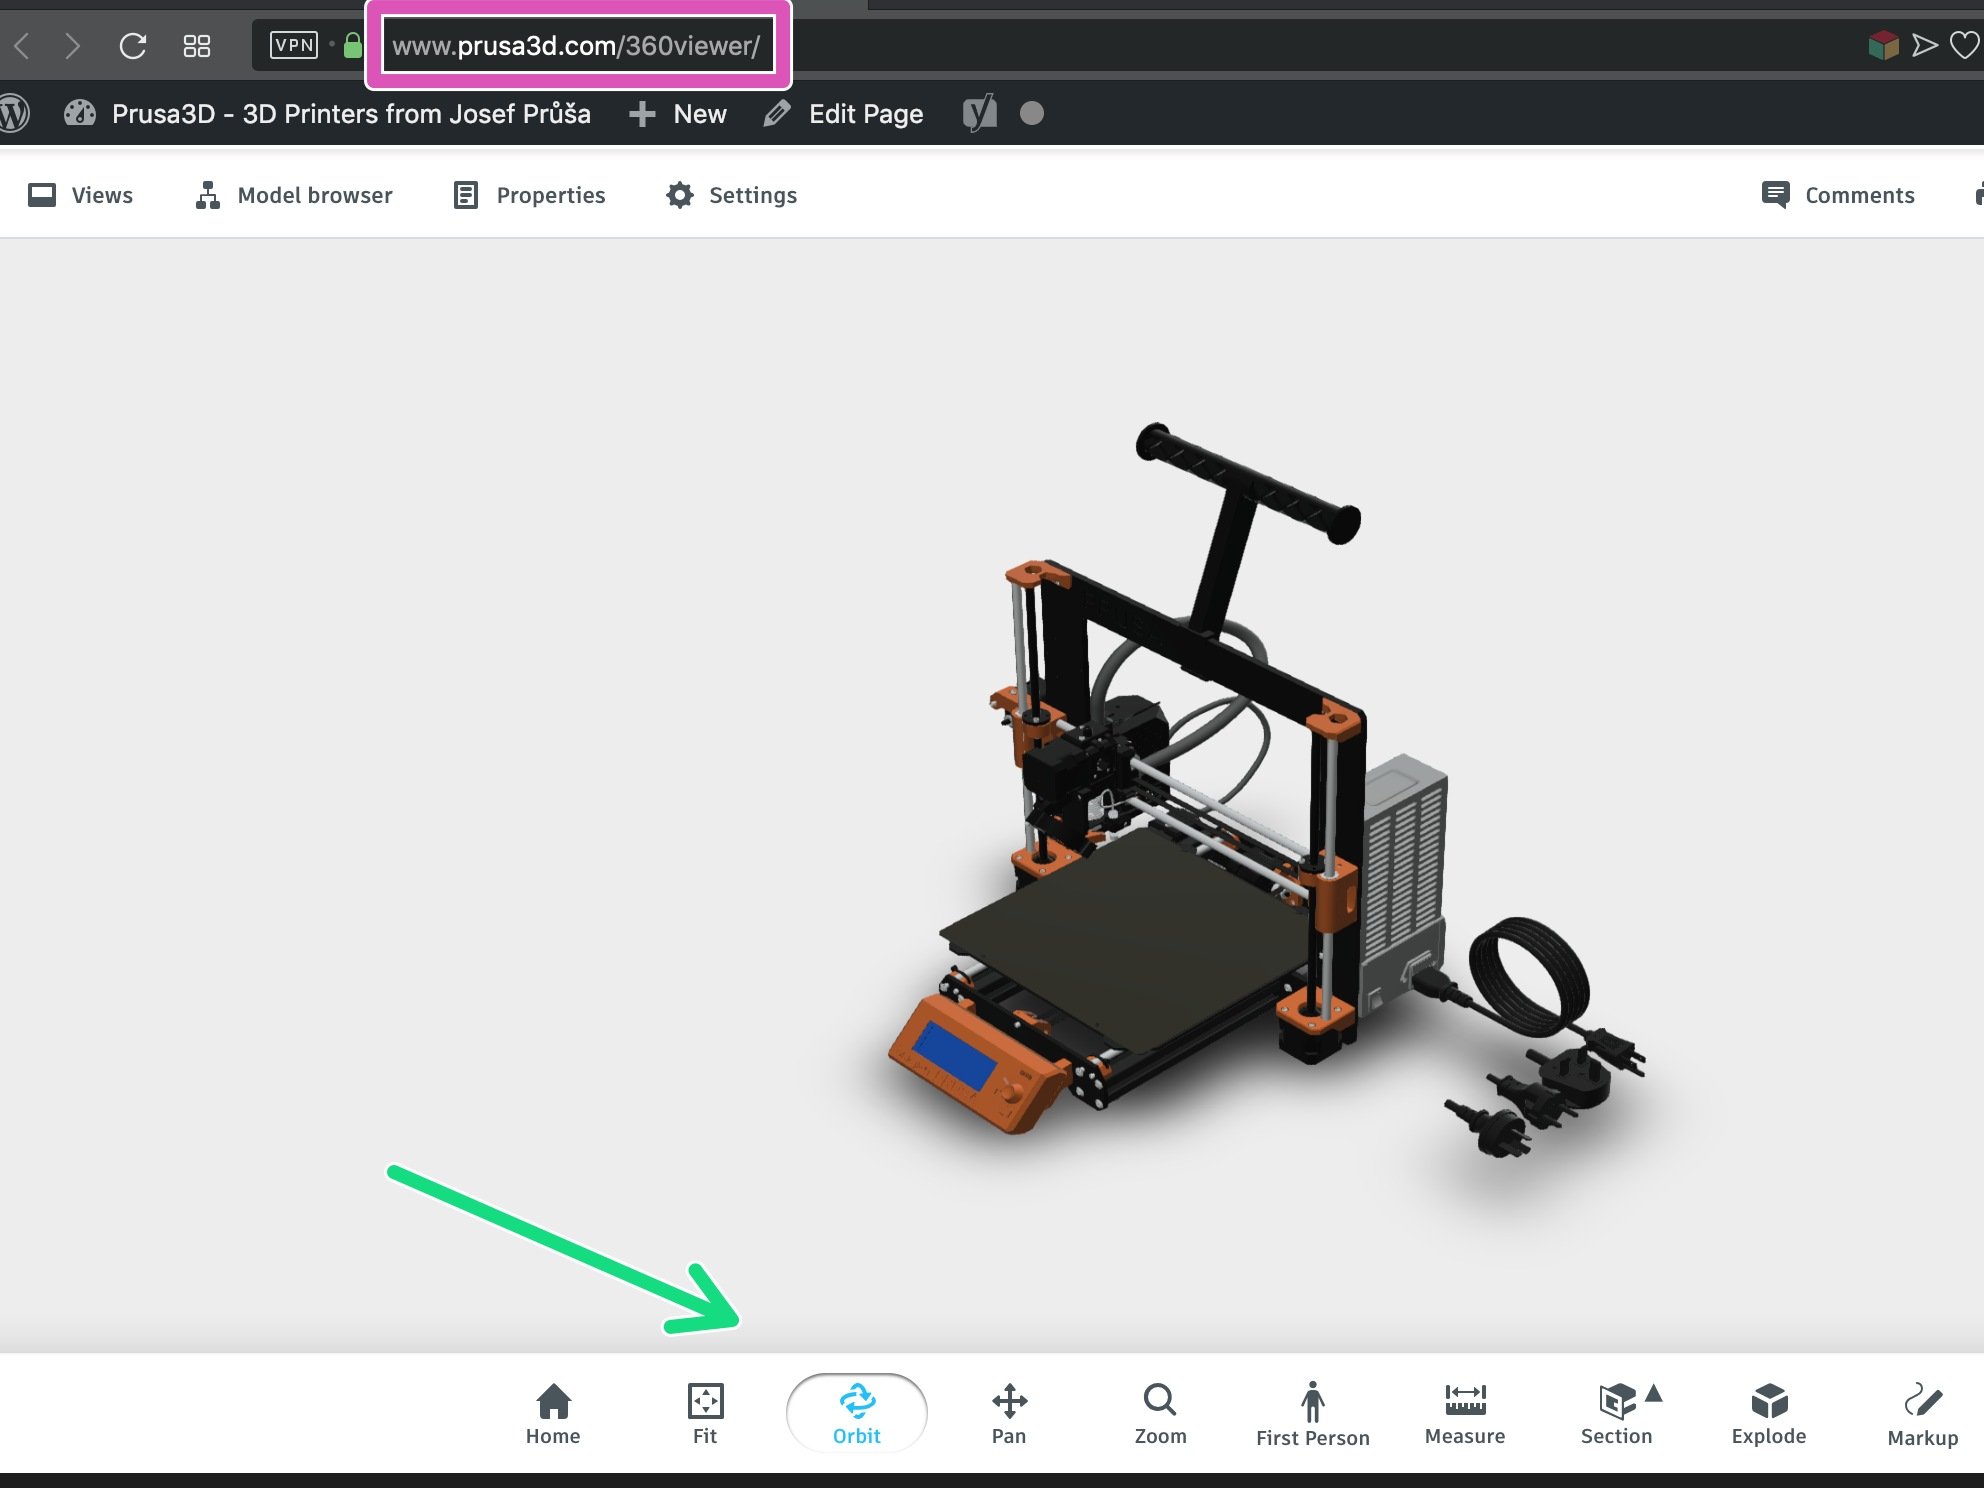 How to use Prusa 360 model